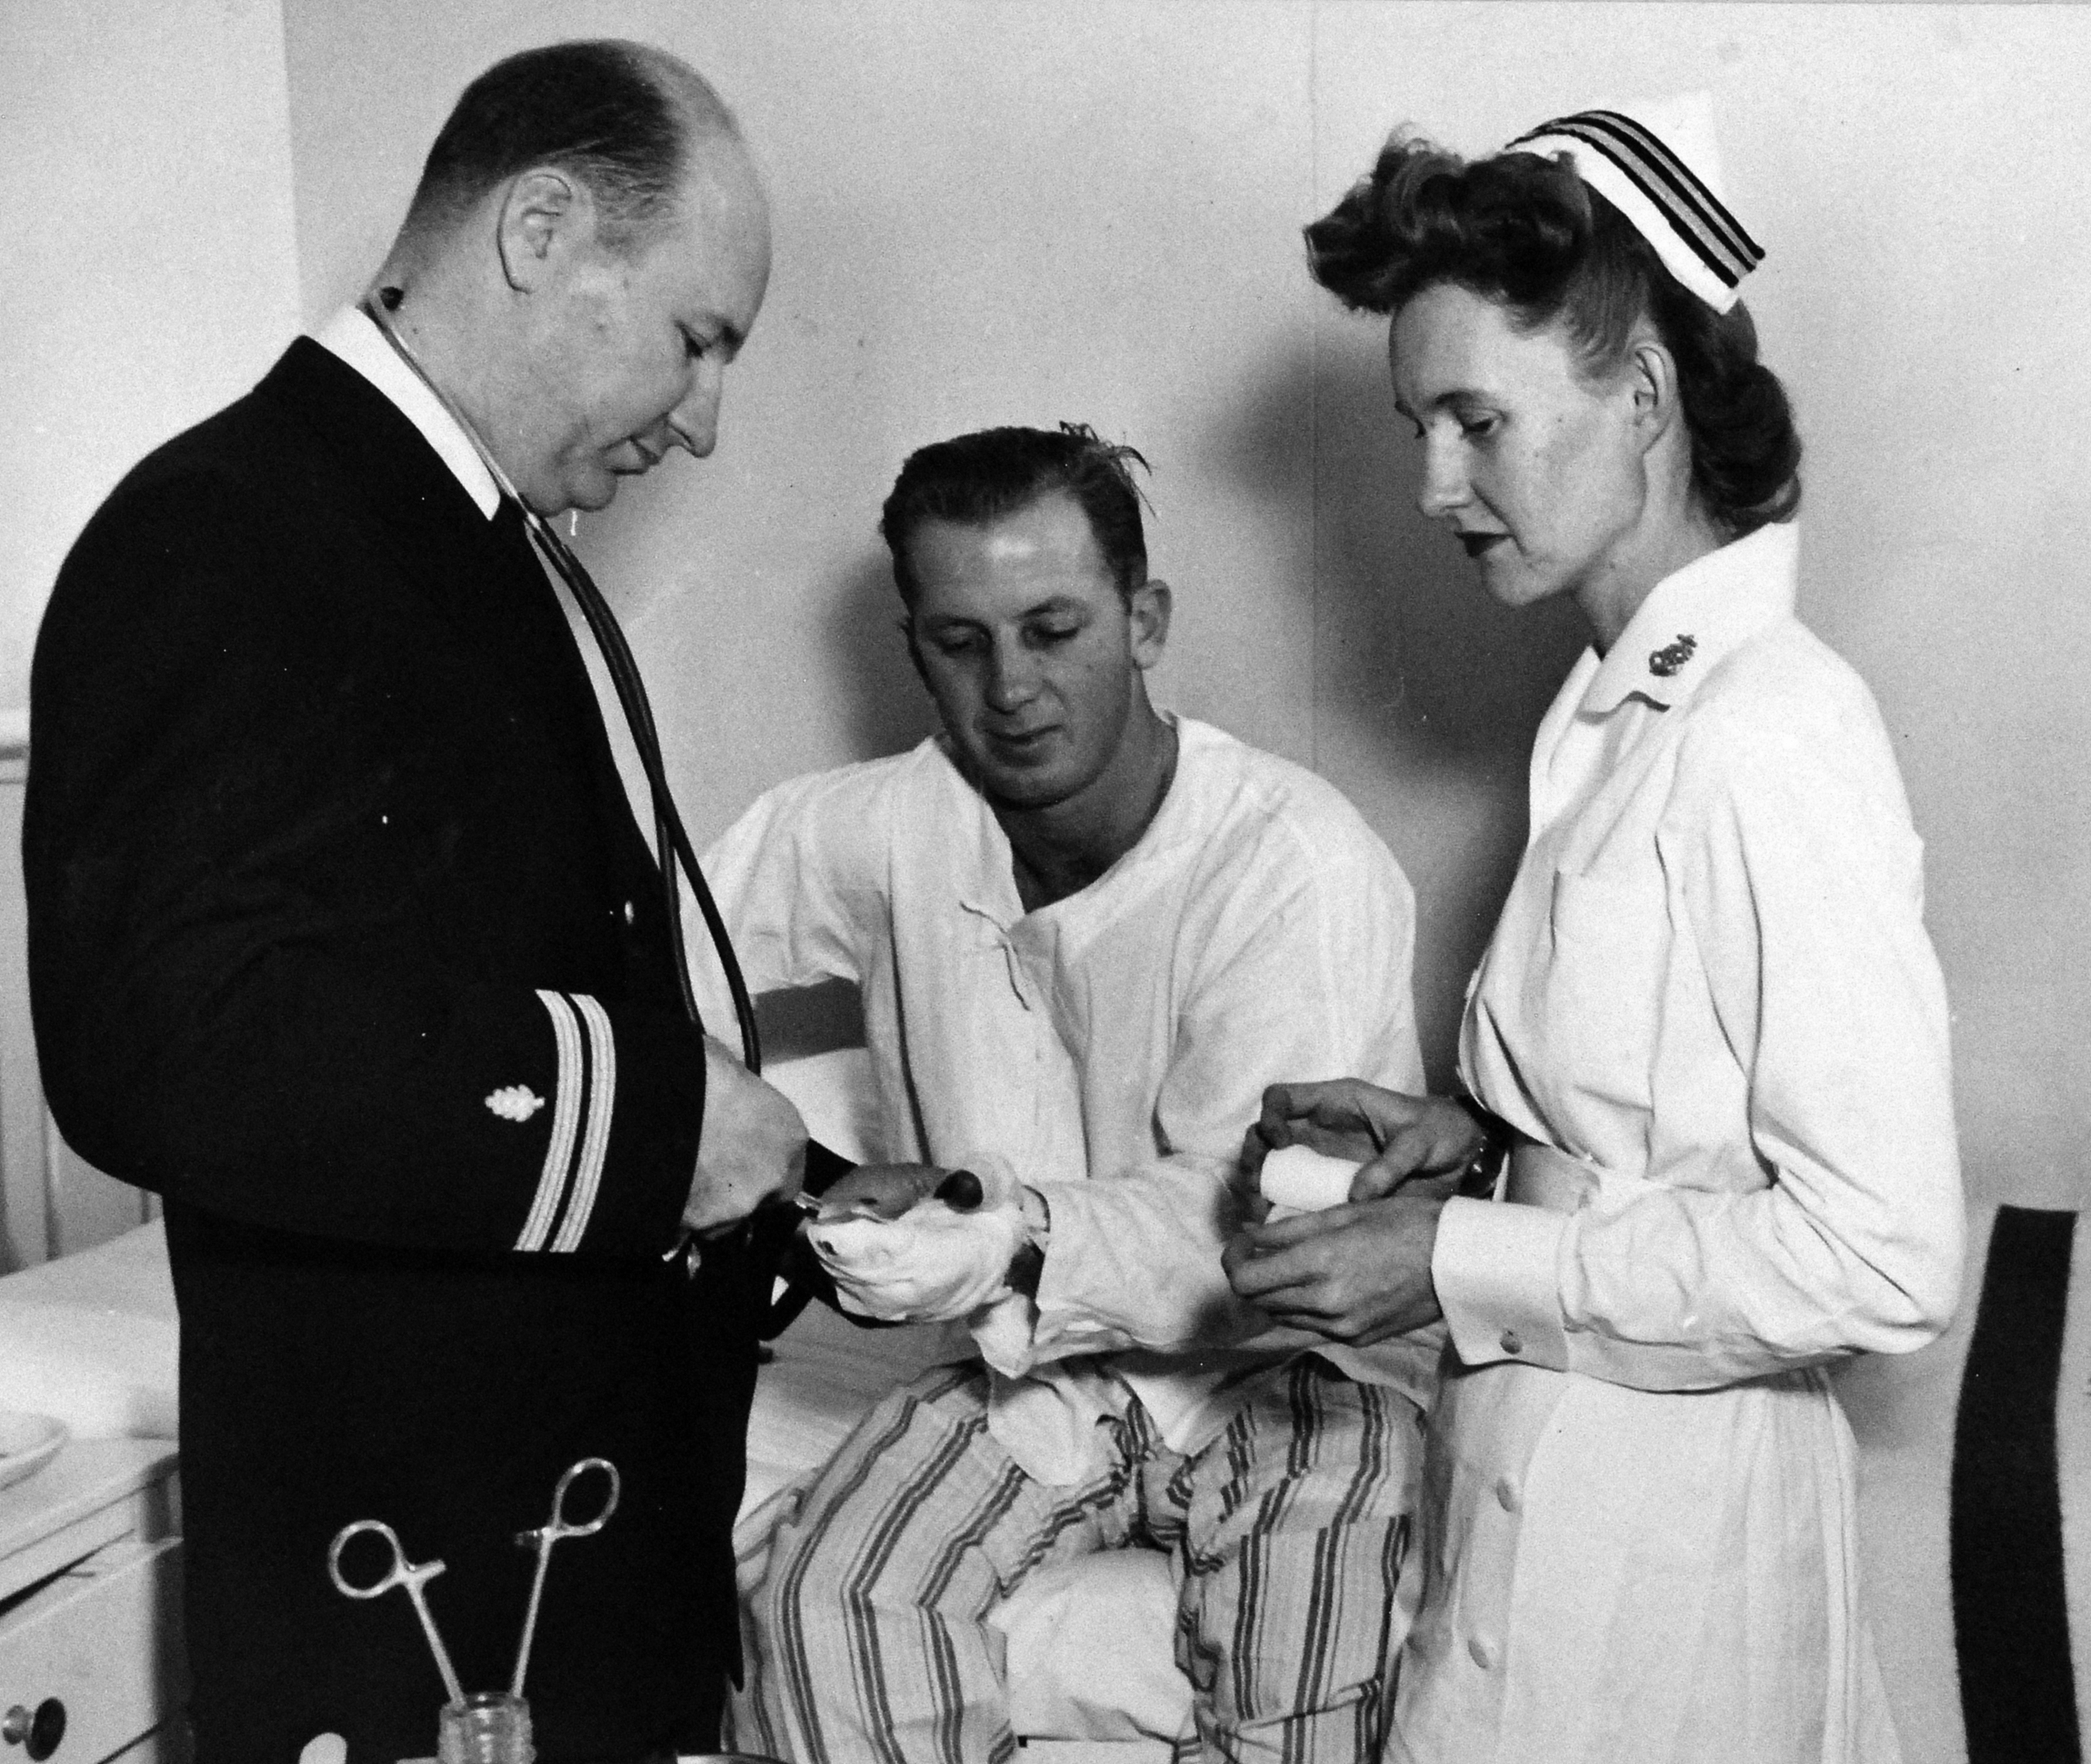 Navy Nurse Assists with Dressing Patient's Hand